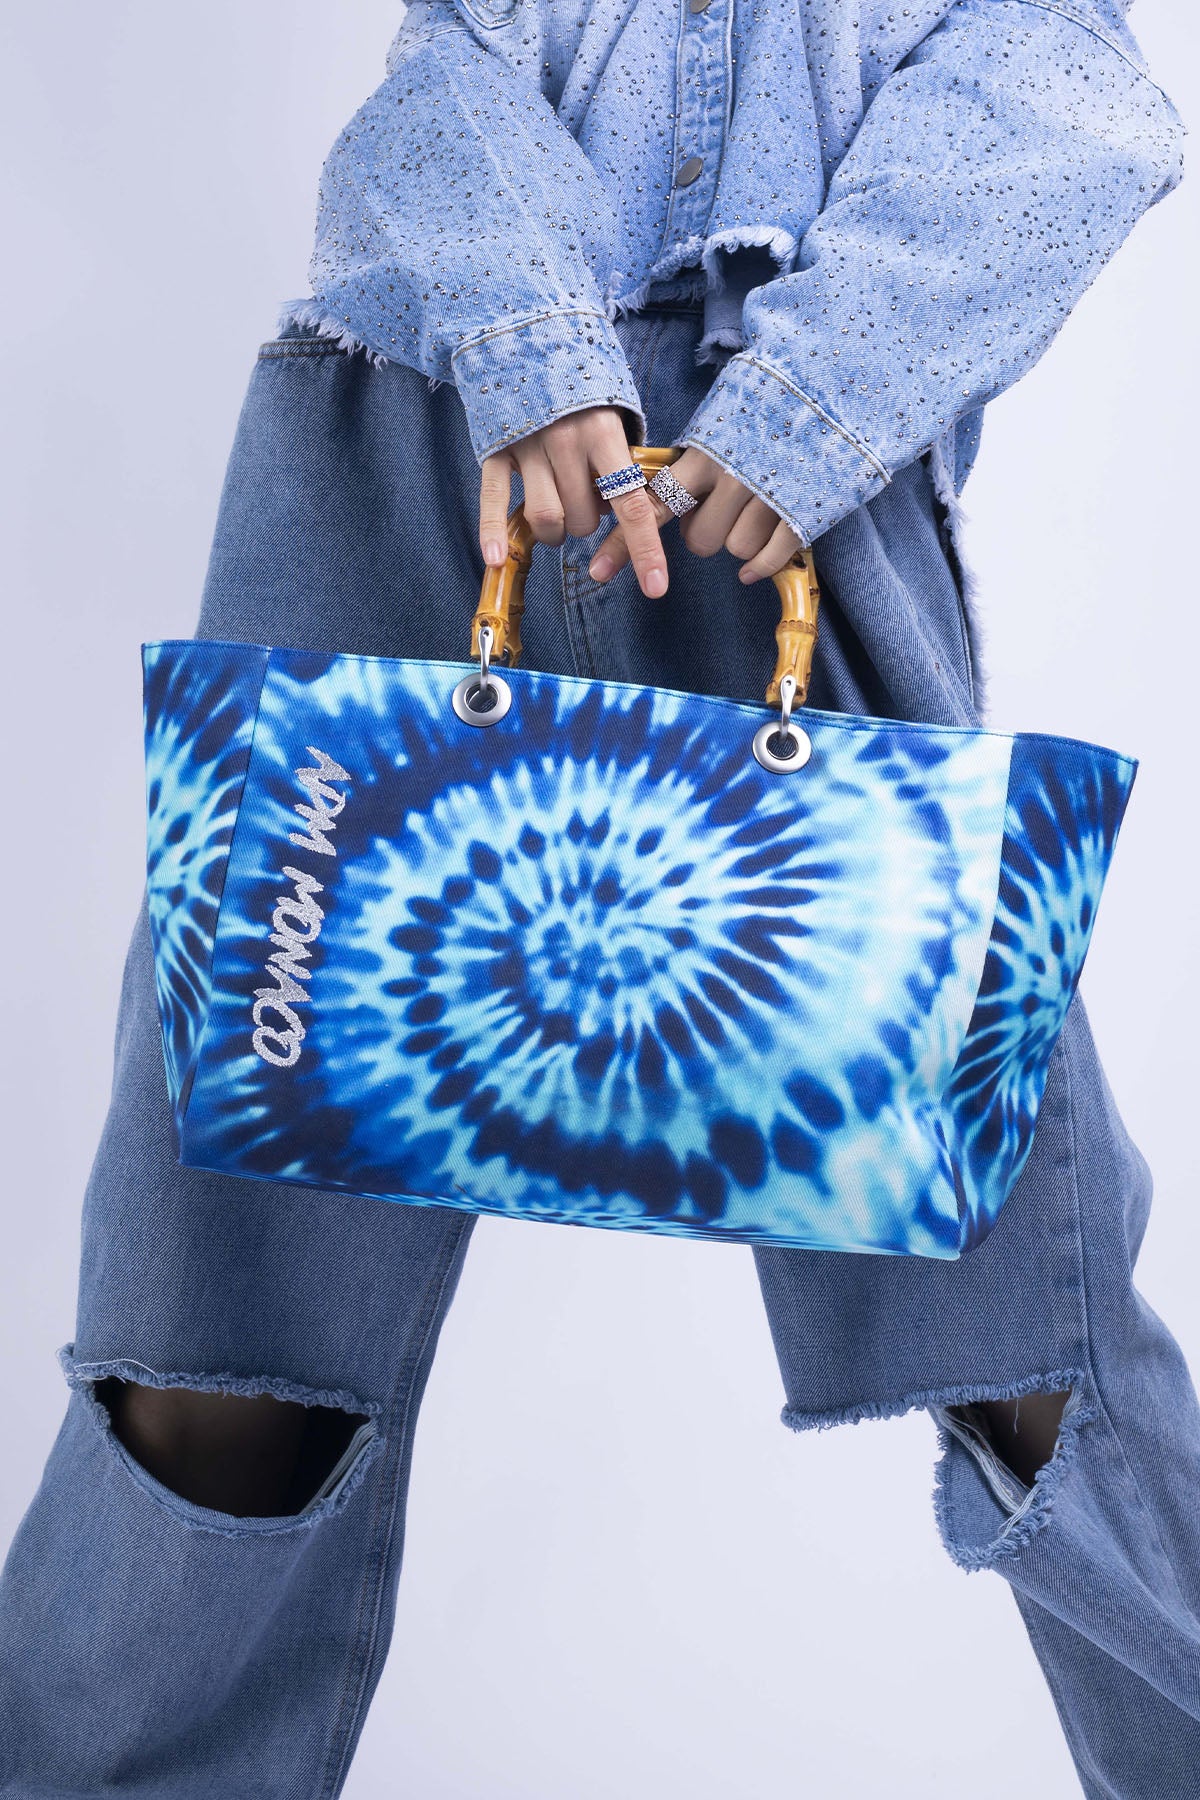 Blue Tie-Dye Bag with bamboo handle